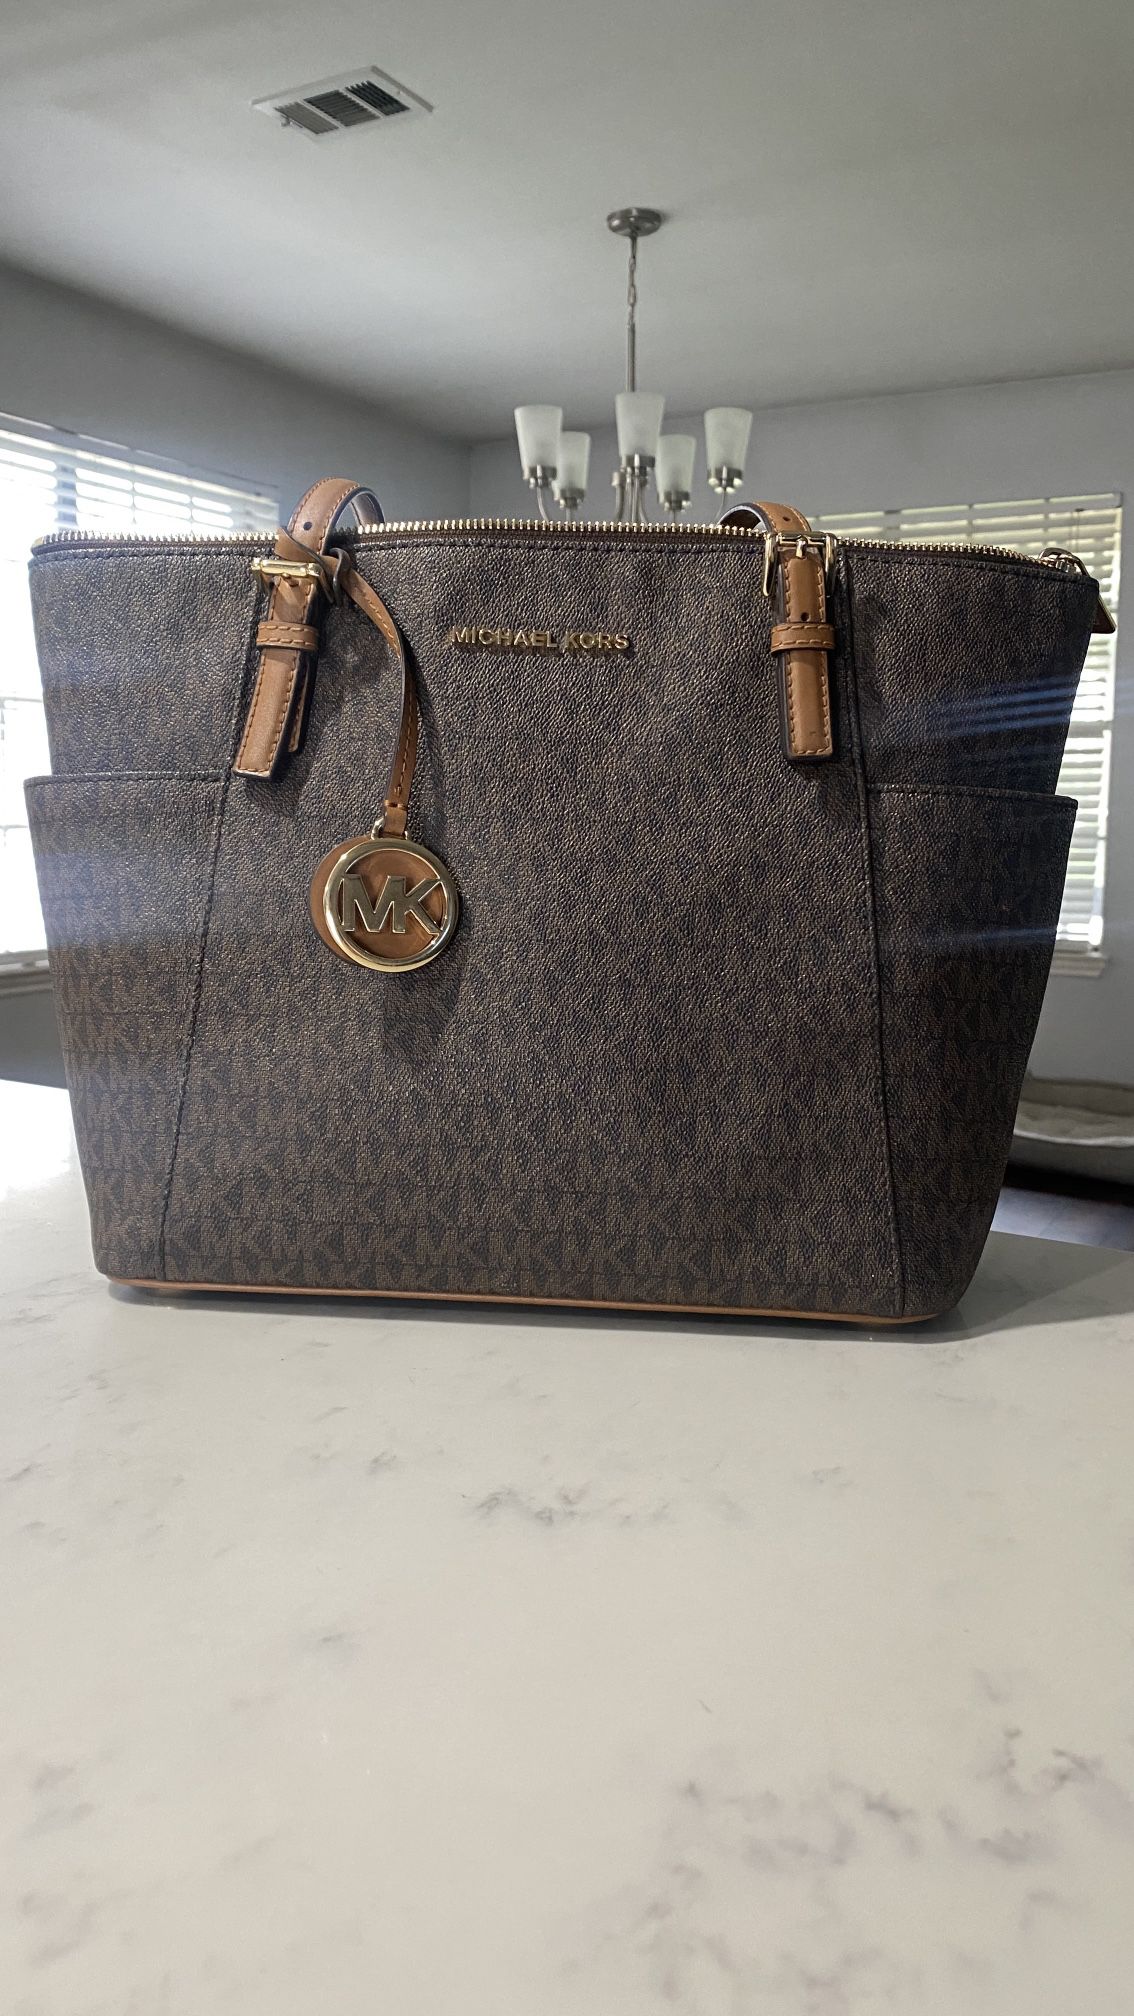 Michael Kors Voyager Tote - Vanilla for Sale in Guthrie, OK - OfferUp